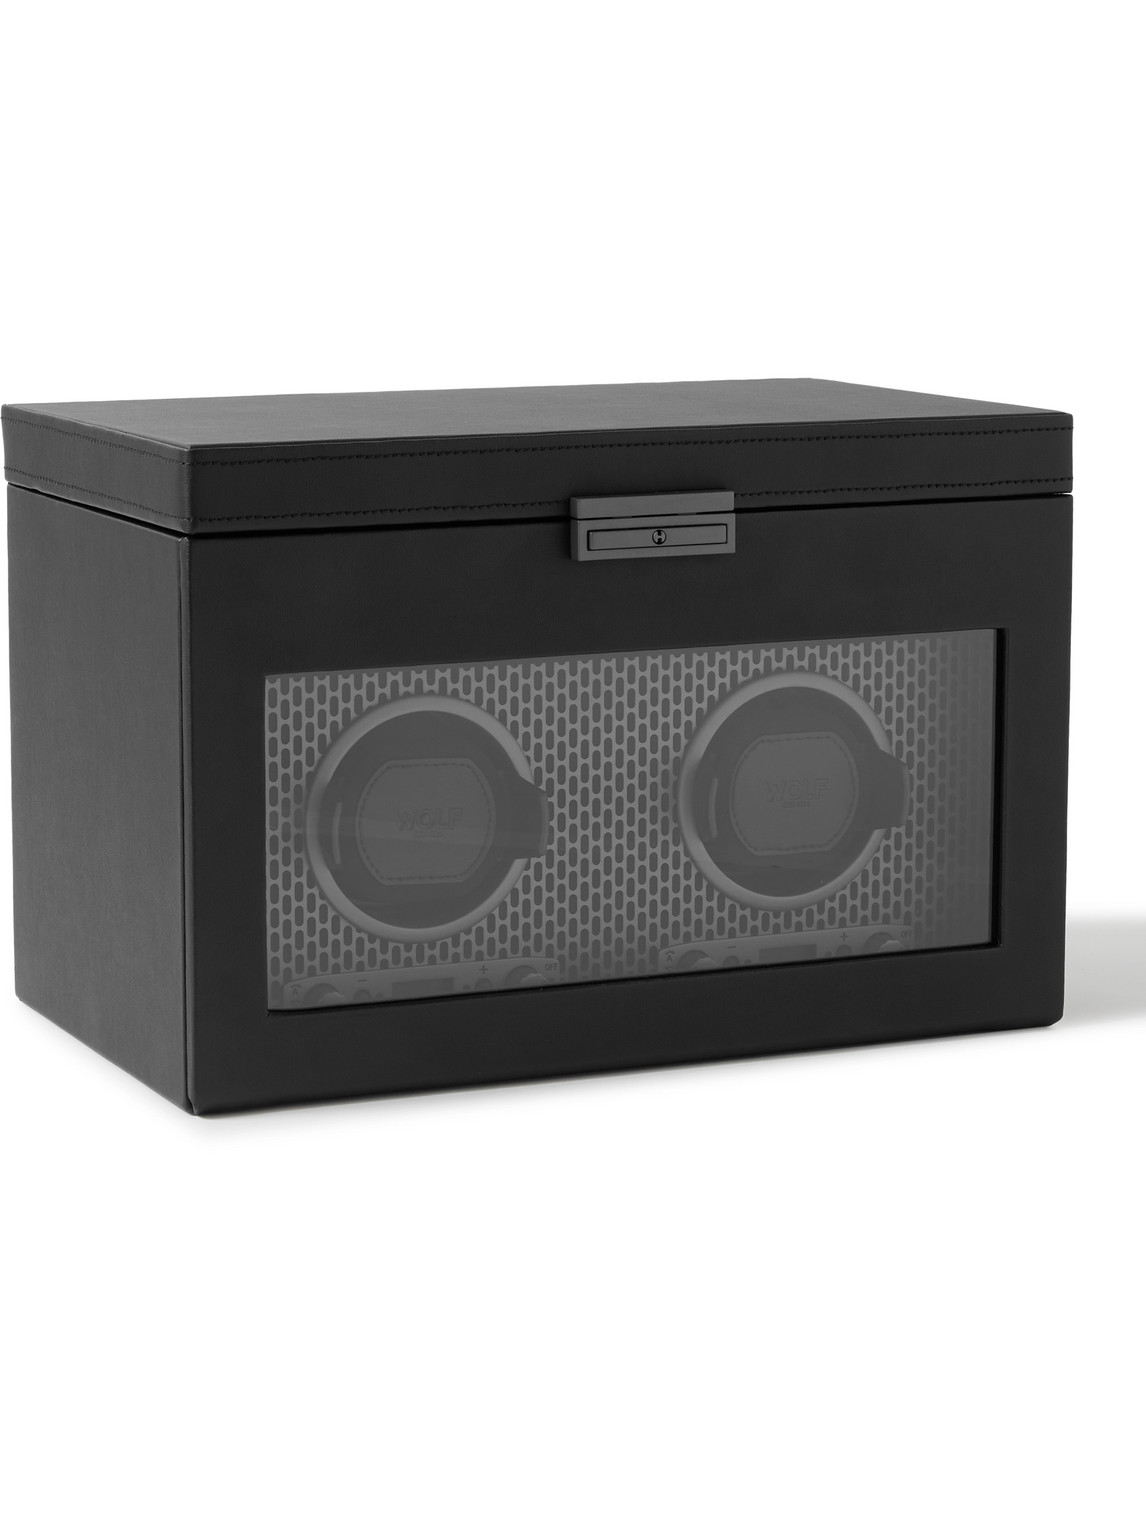 Wolf Axis Vegan Leather Two-piece Watch Winder In Black